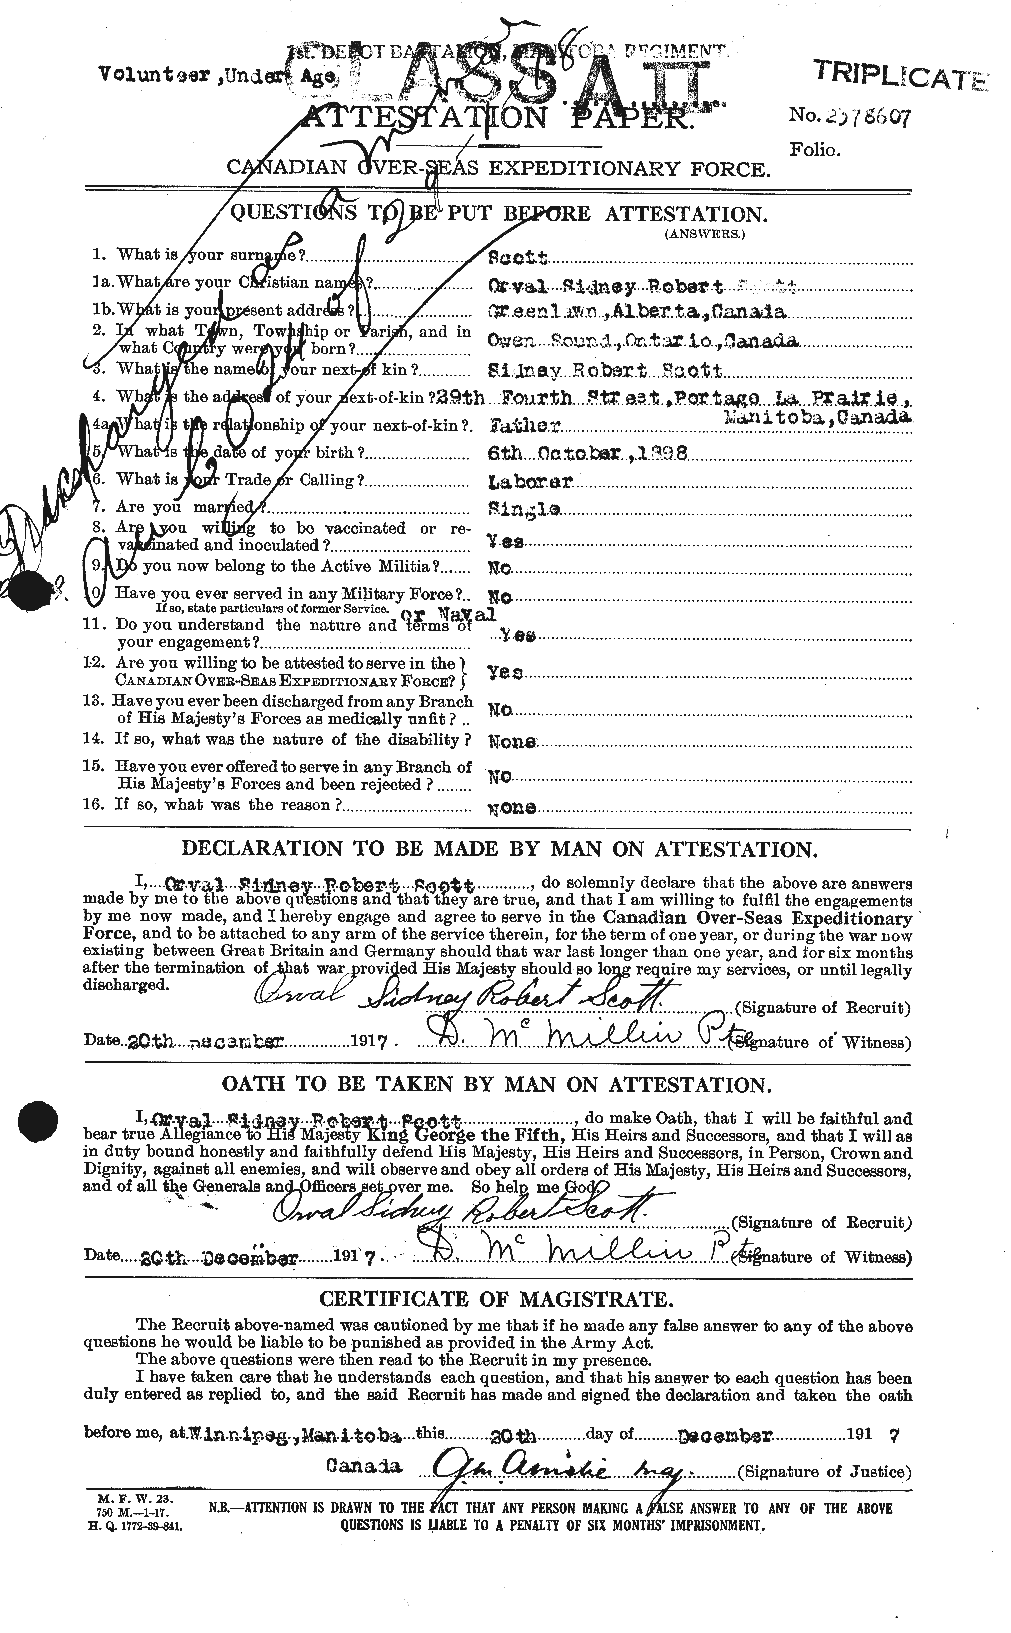 Personnel Records of the First World War - CEF 090235a